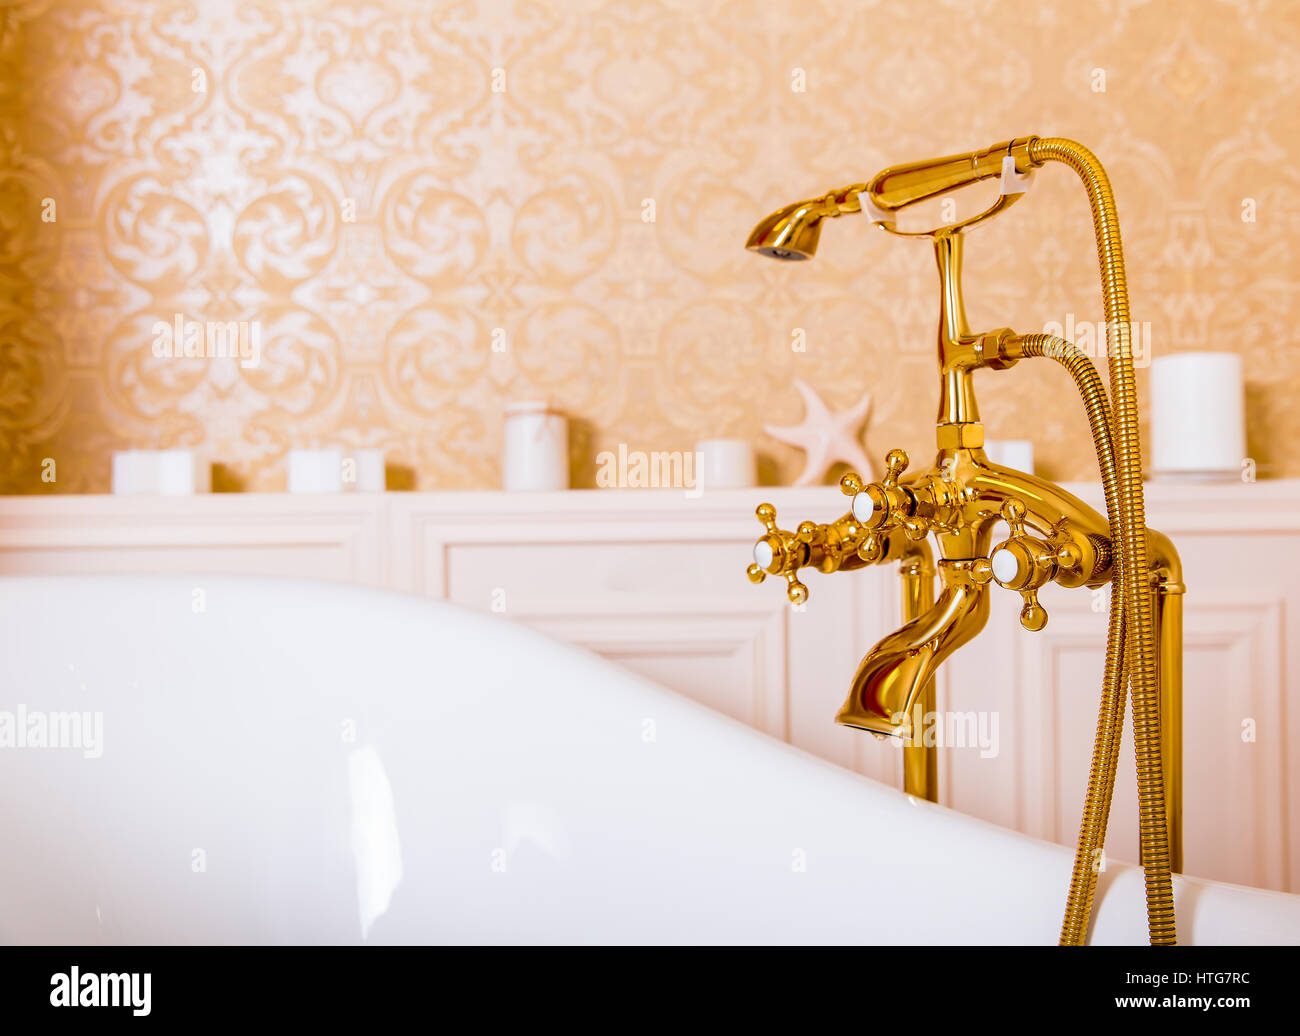 Rich Gold Faucet And White Bath In The Bathroom Luxury Sanitary